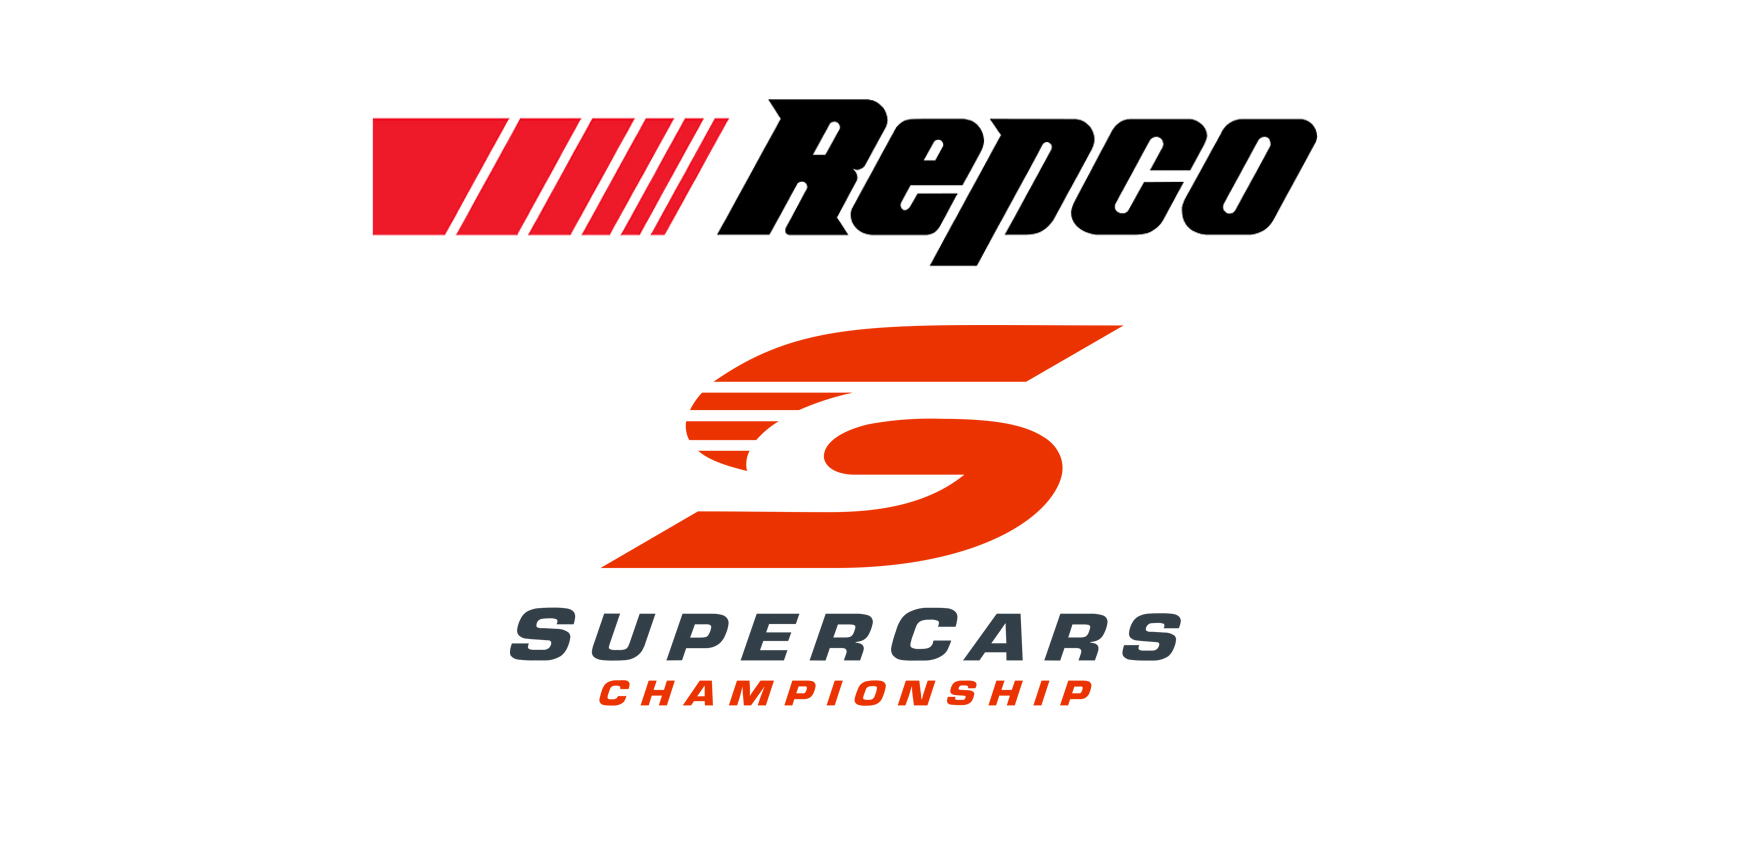 Supercars Signs Up Repco, Becomes Repco Supercars Championship